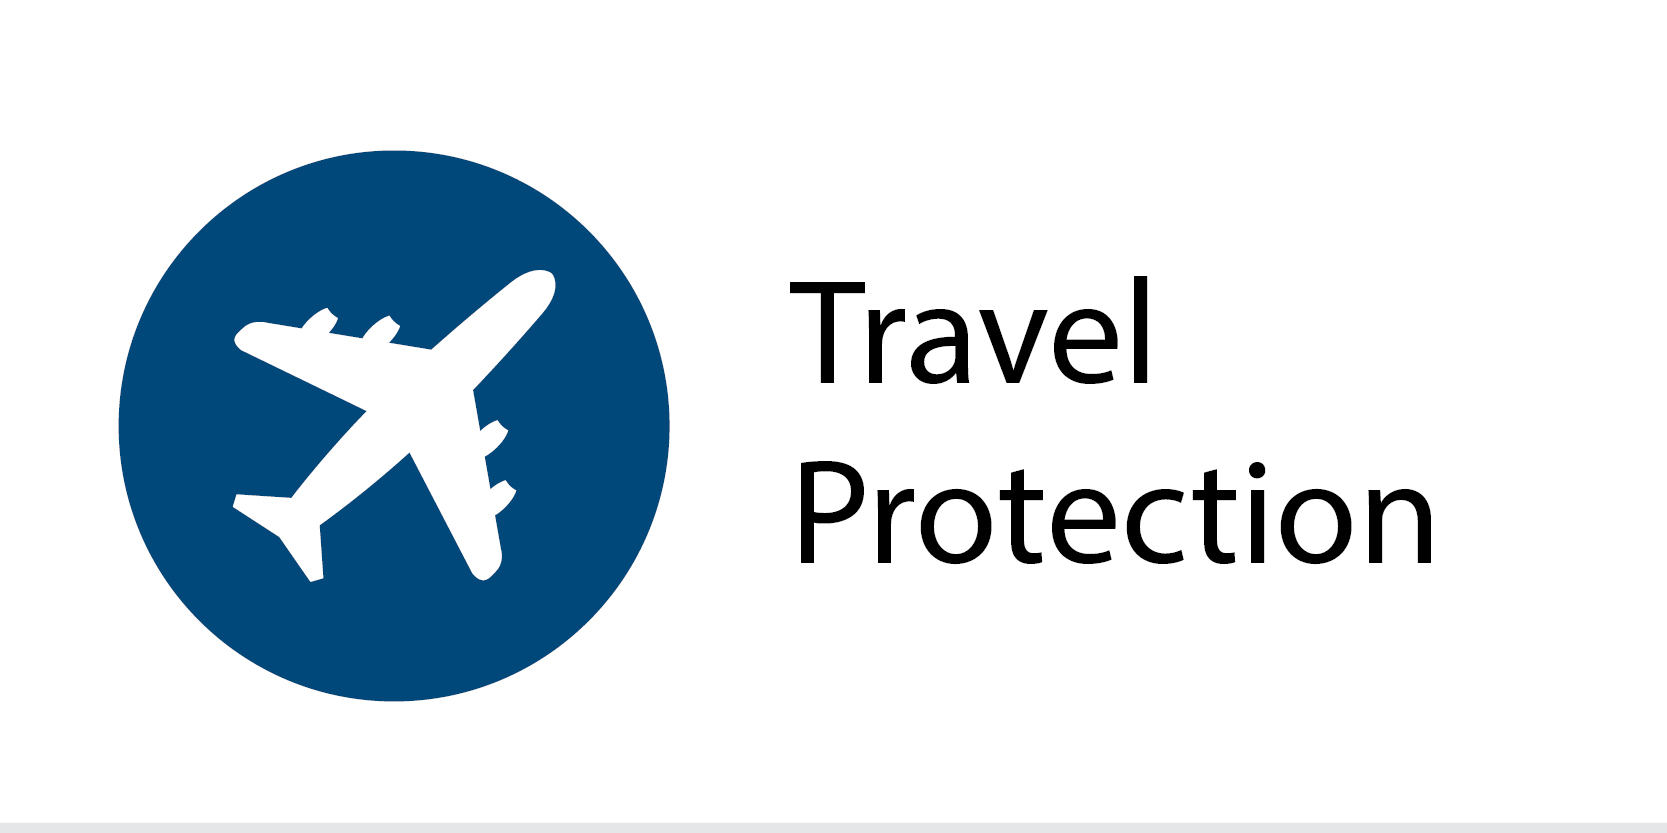 Travel+Protection